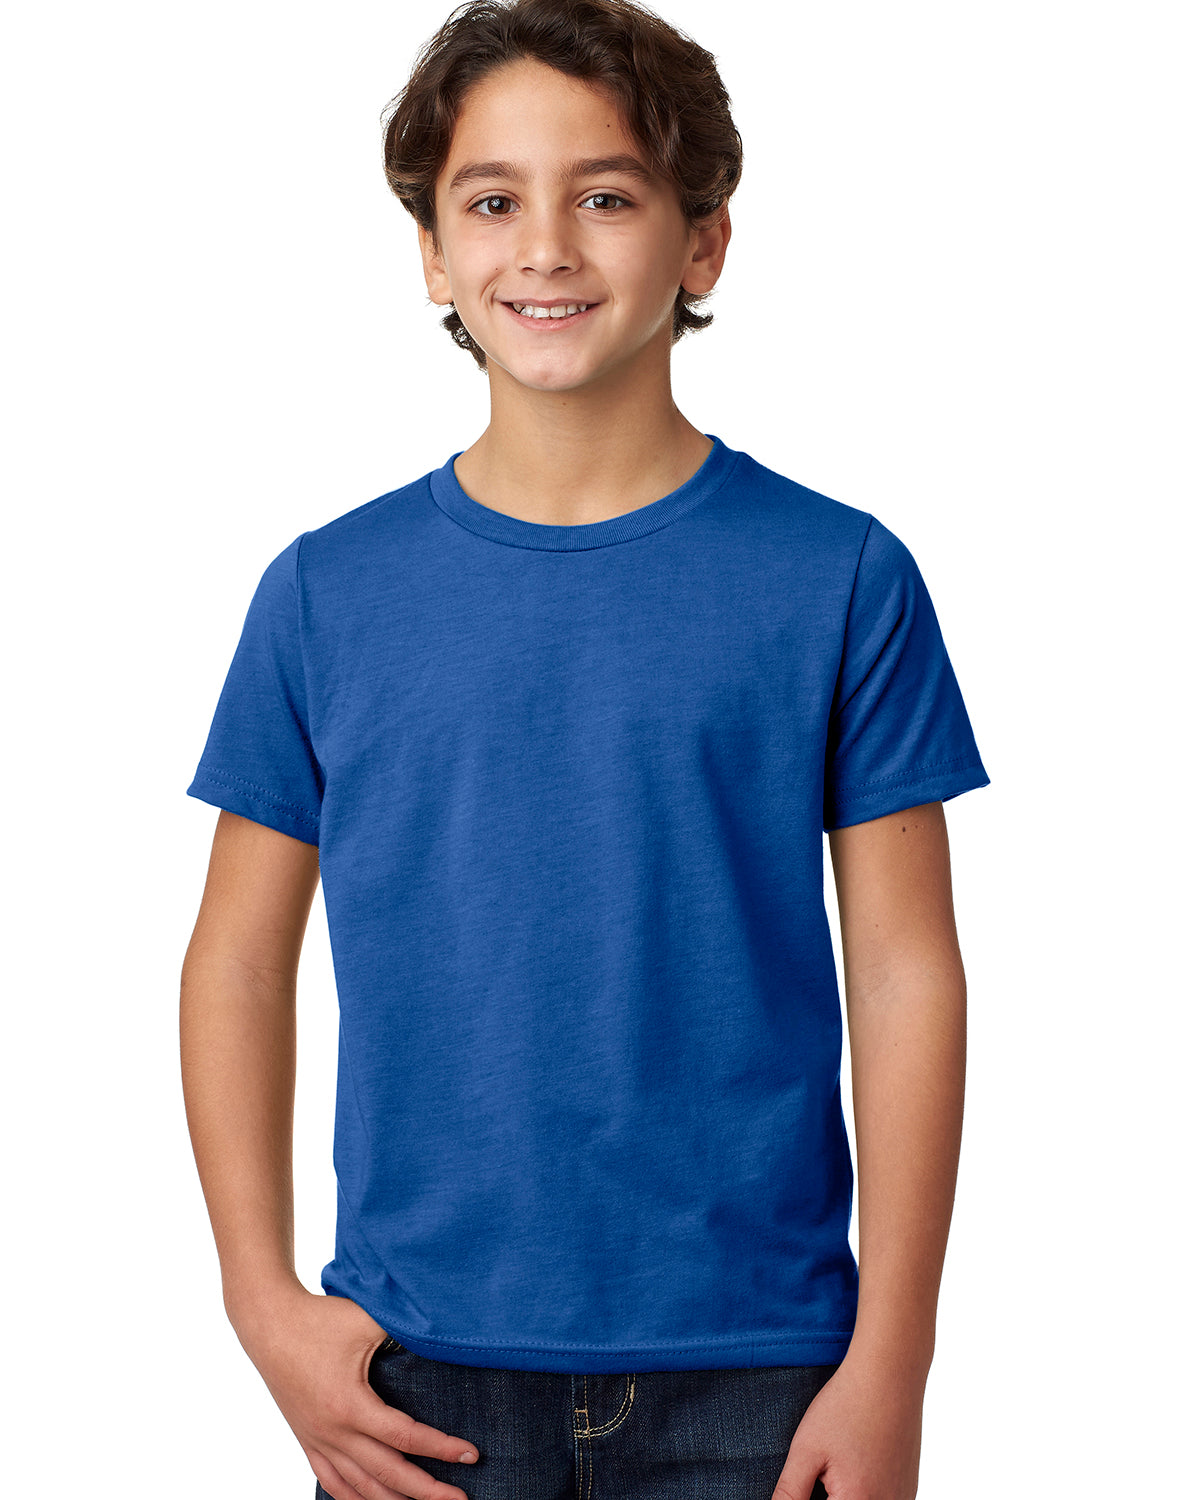 child model wearing next level youth CVC tee in royal blue